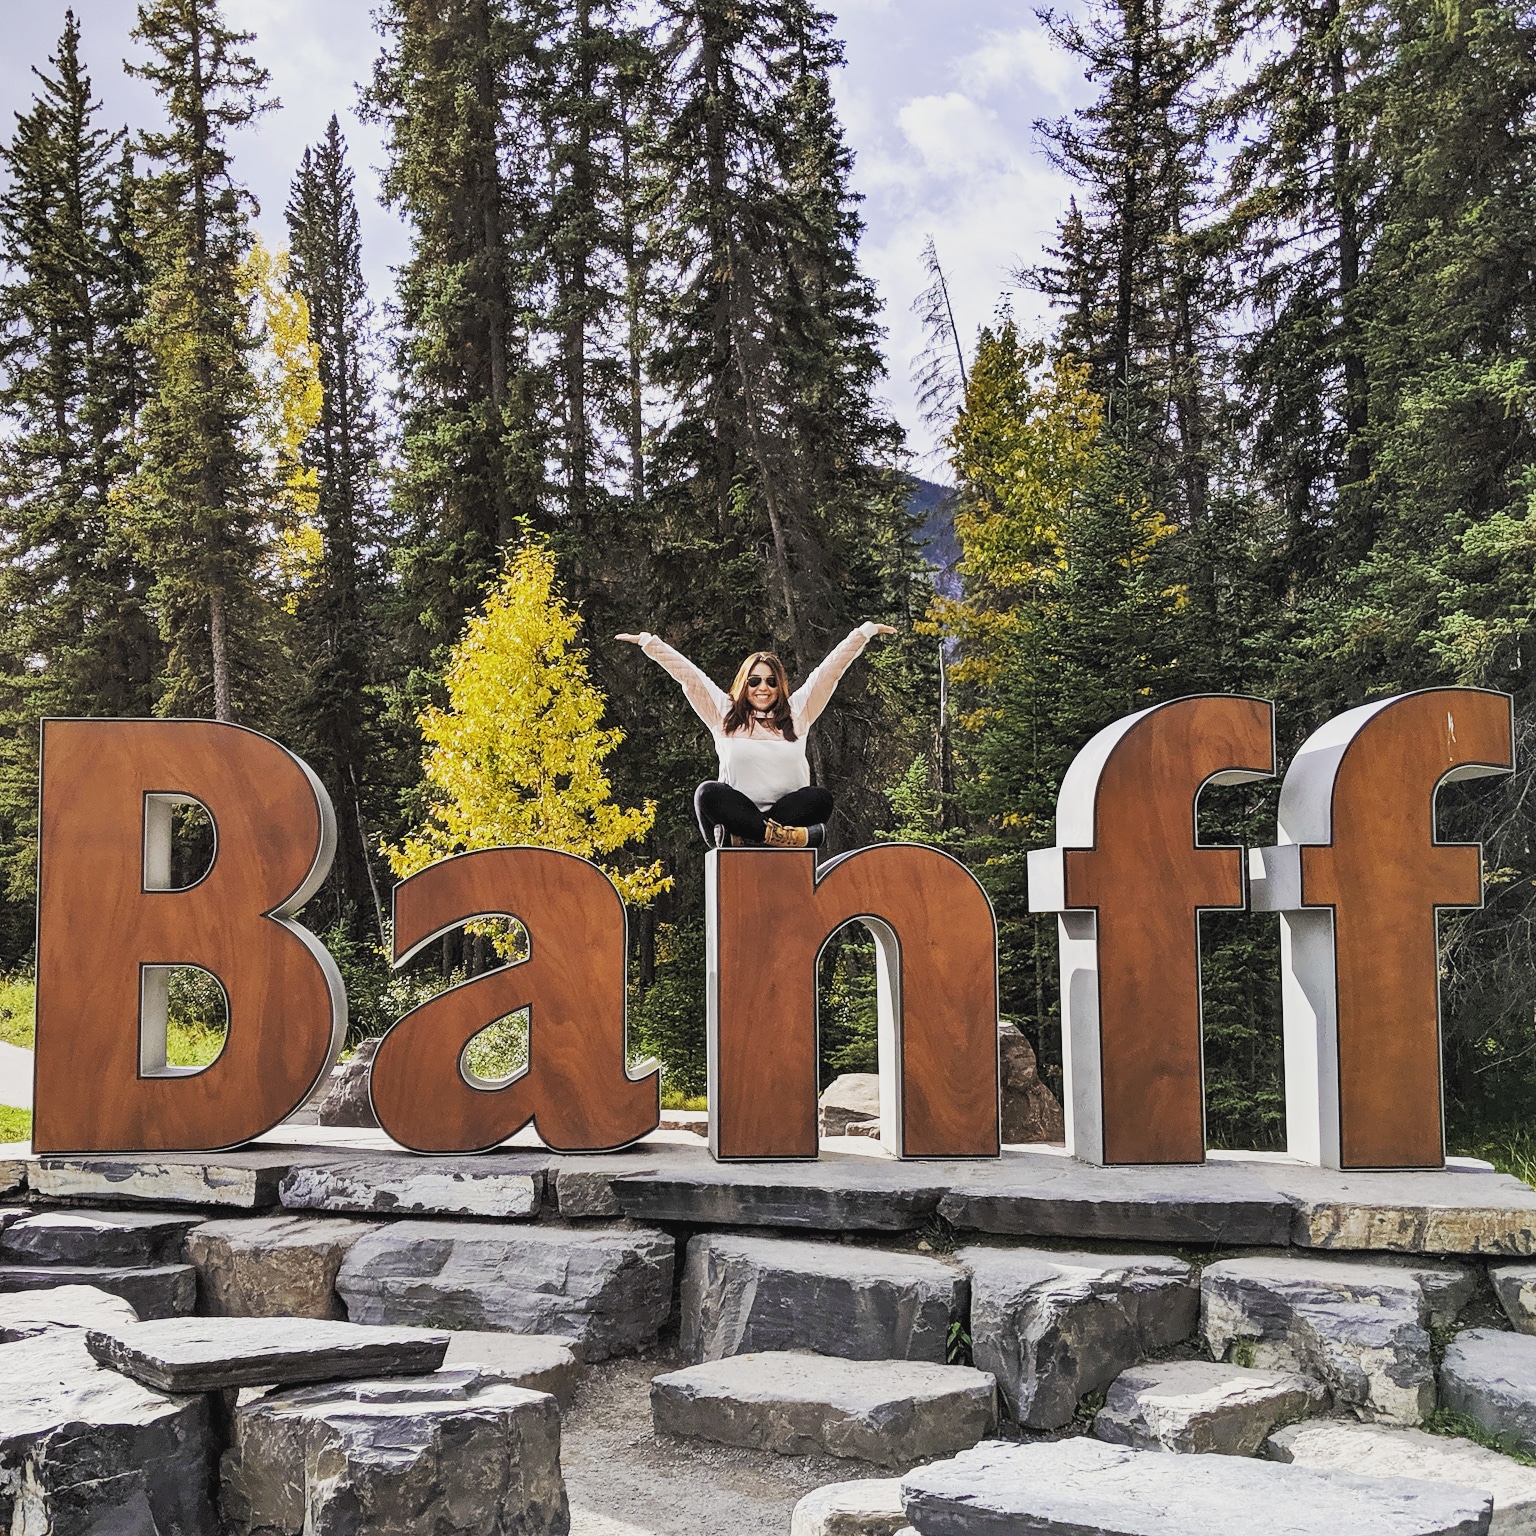 Me sitting on the Banff letters at Banff National Park, Alberta, Canada.